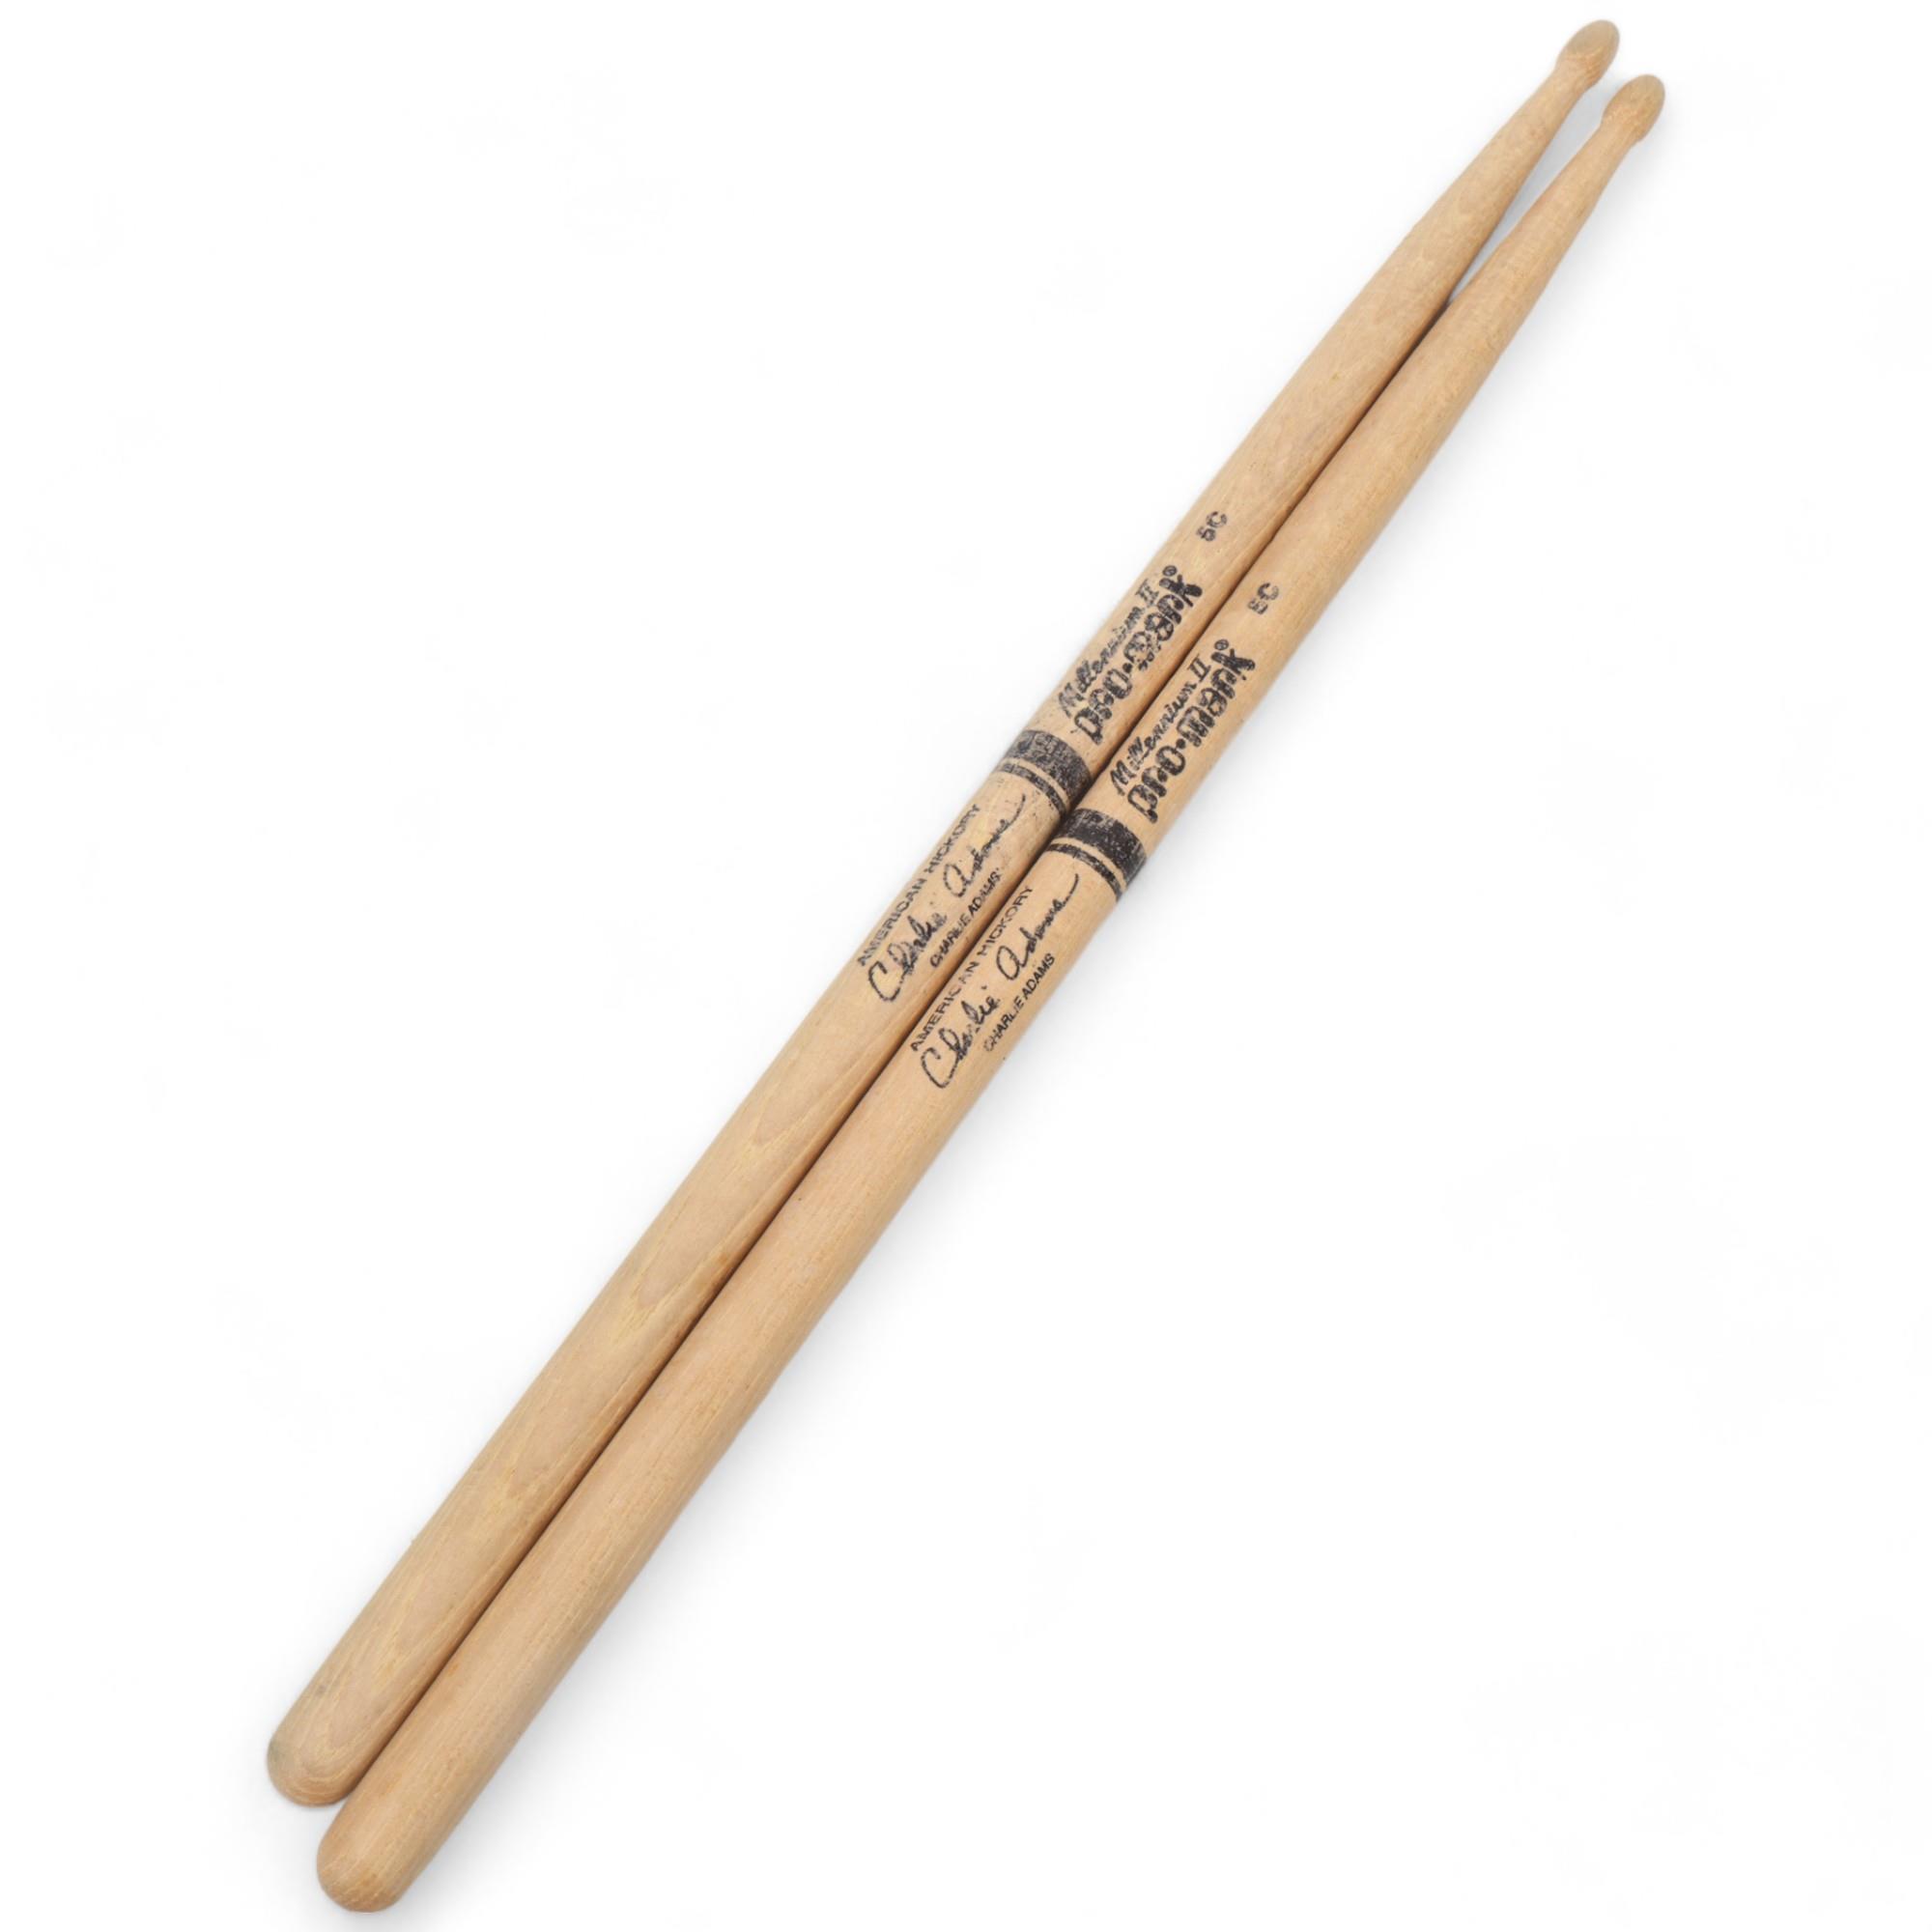 Two USED PROMARK 'CHARLIE ADAMS 5C' Hickory DRUMSTICKS belonging to MITCH MITCHELL